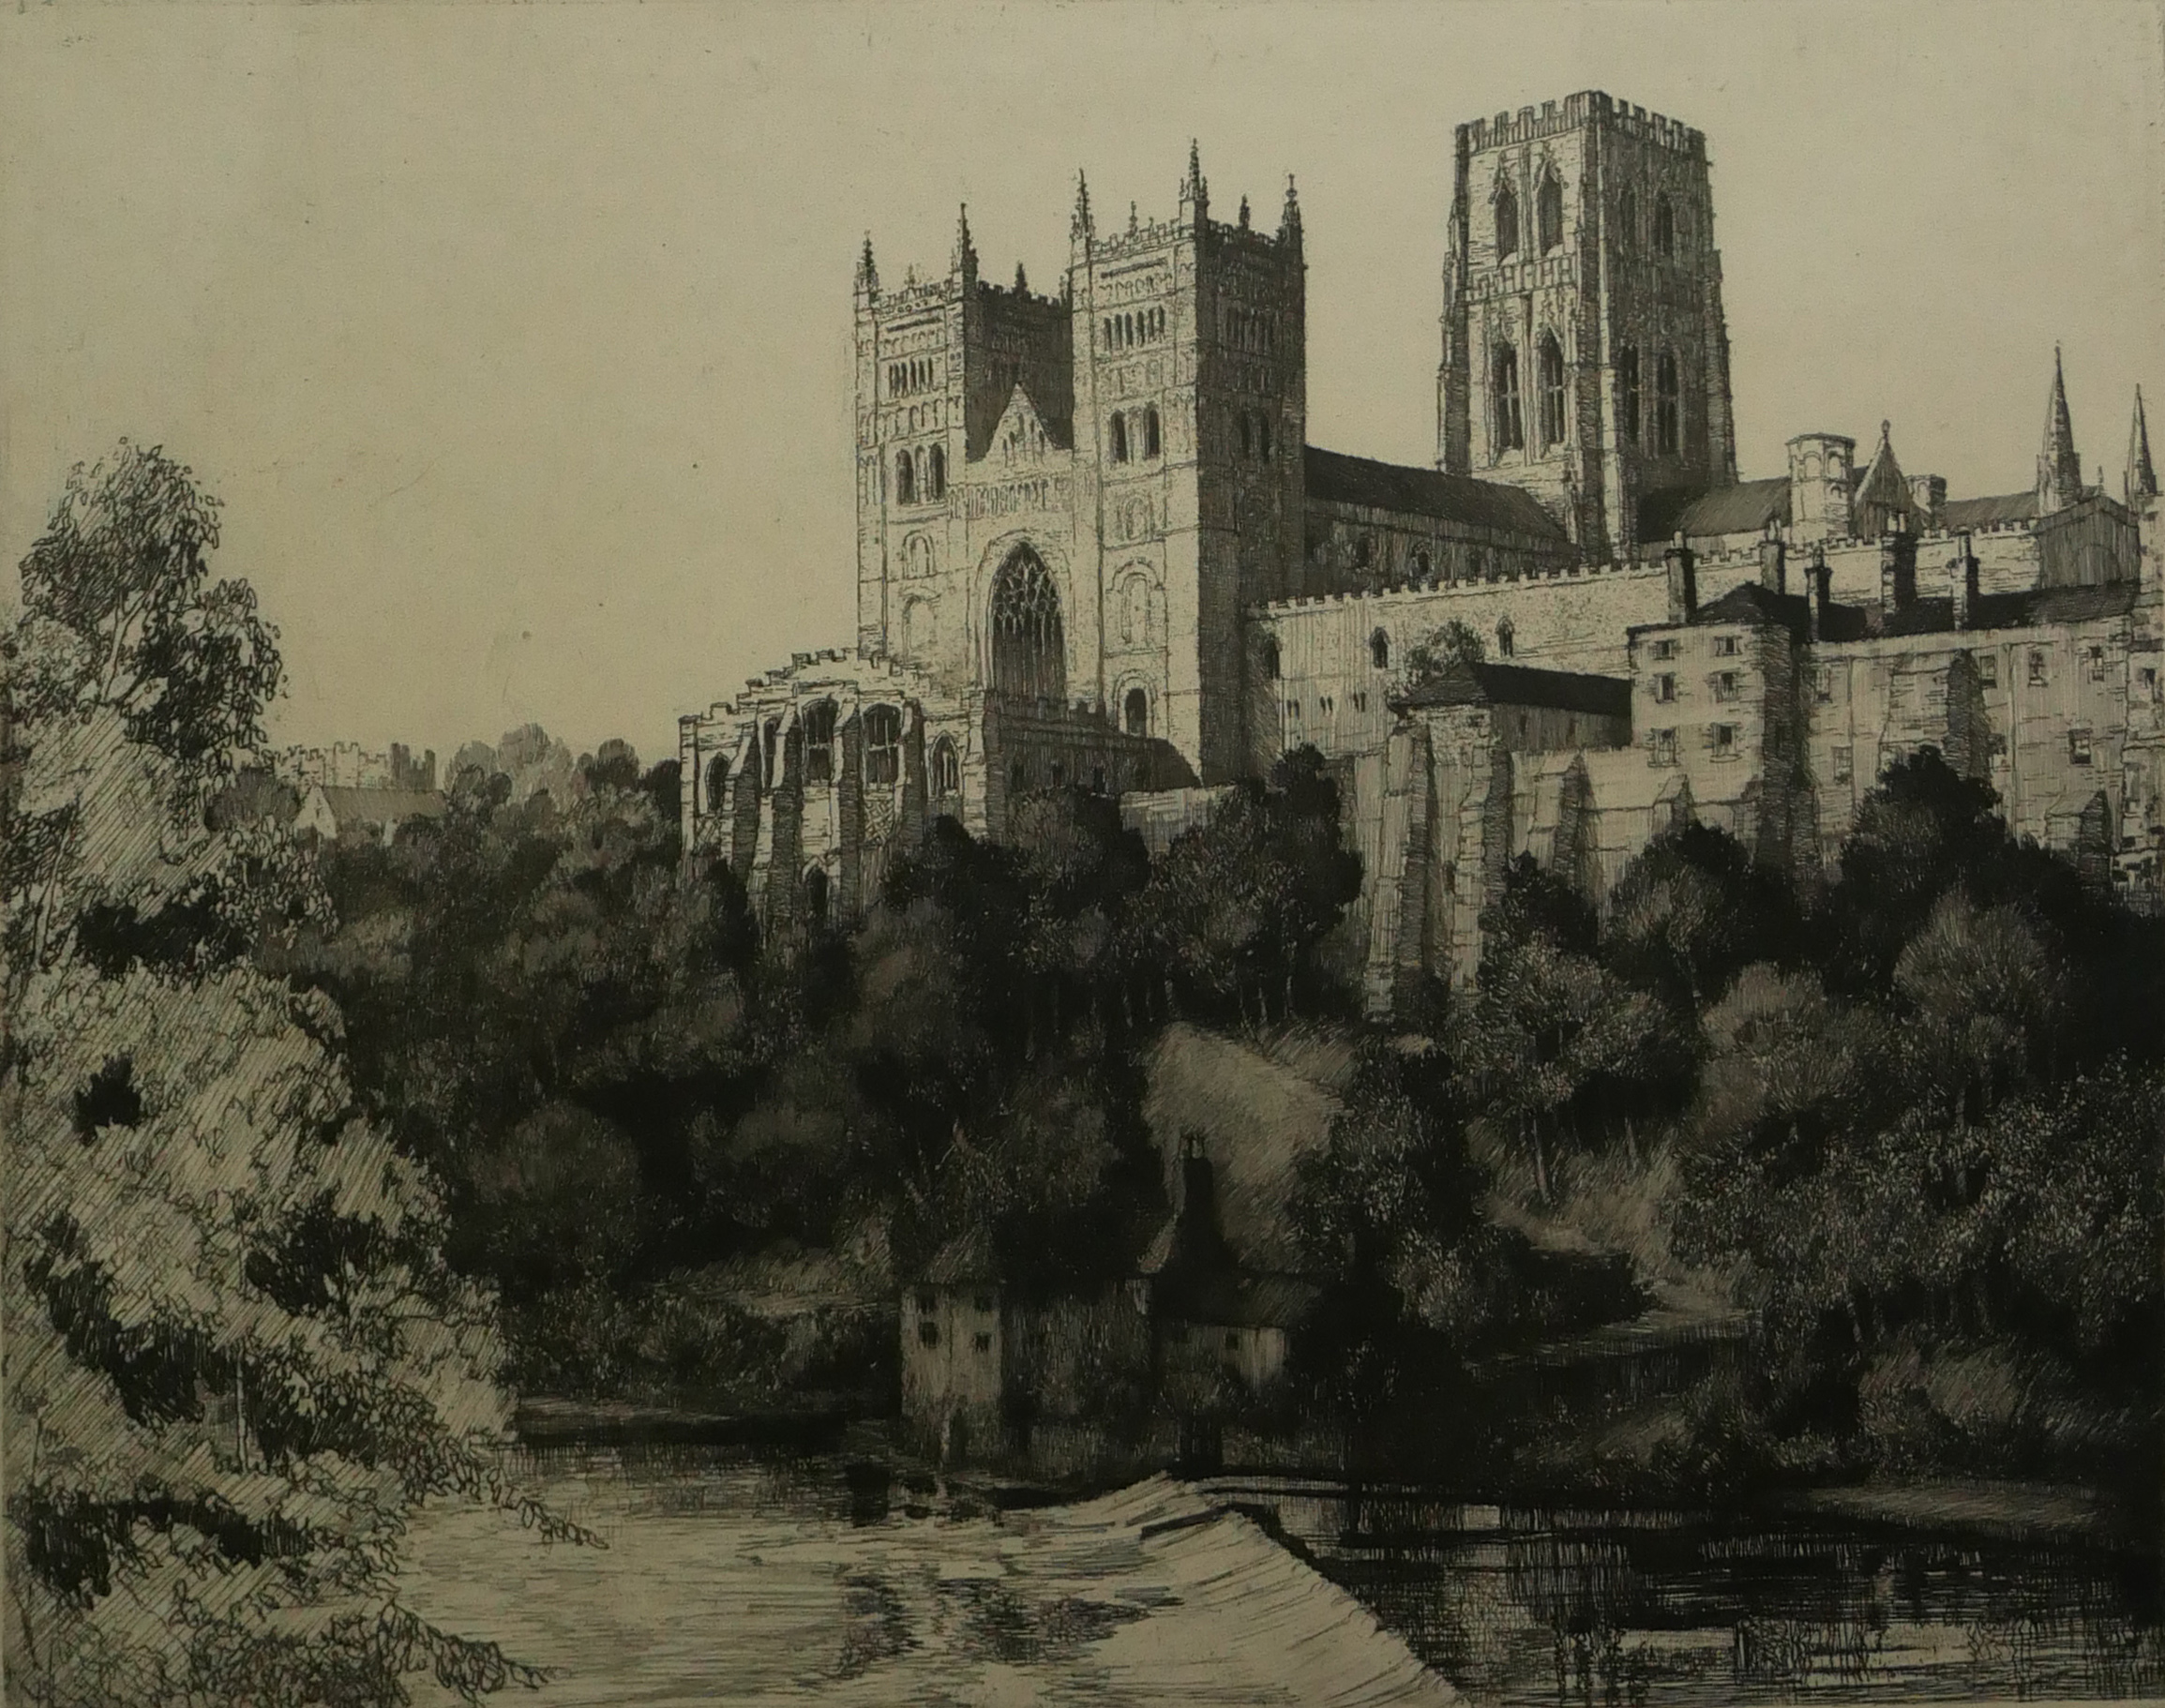 MARGARET RUDGE, 1885 - 1972, A BLACK AND WHITE ARCHITECTURAL ENGRAVING View of Durham Cathedral